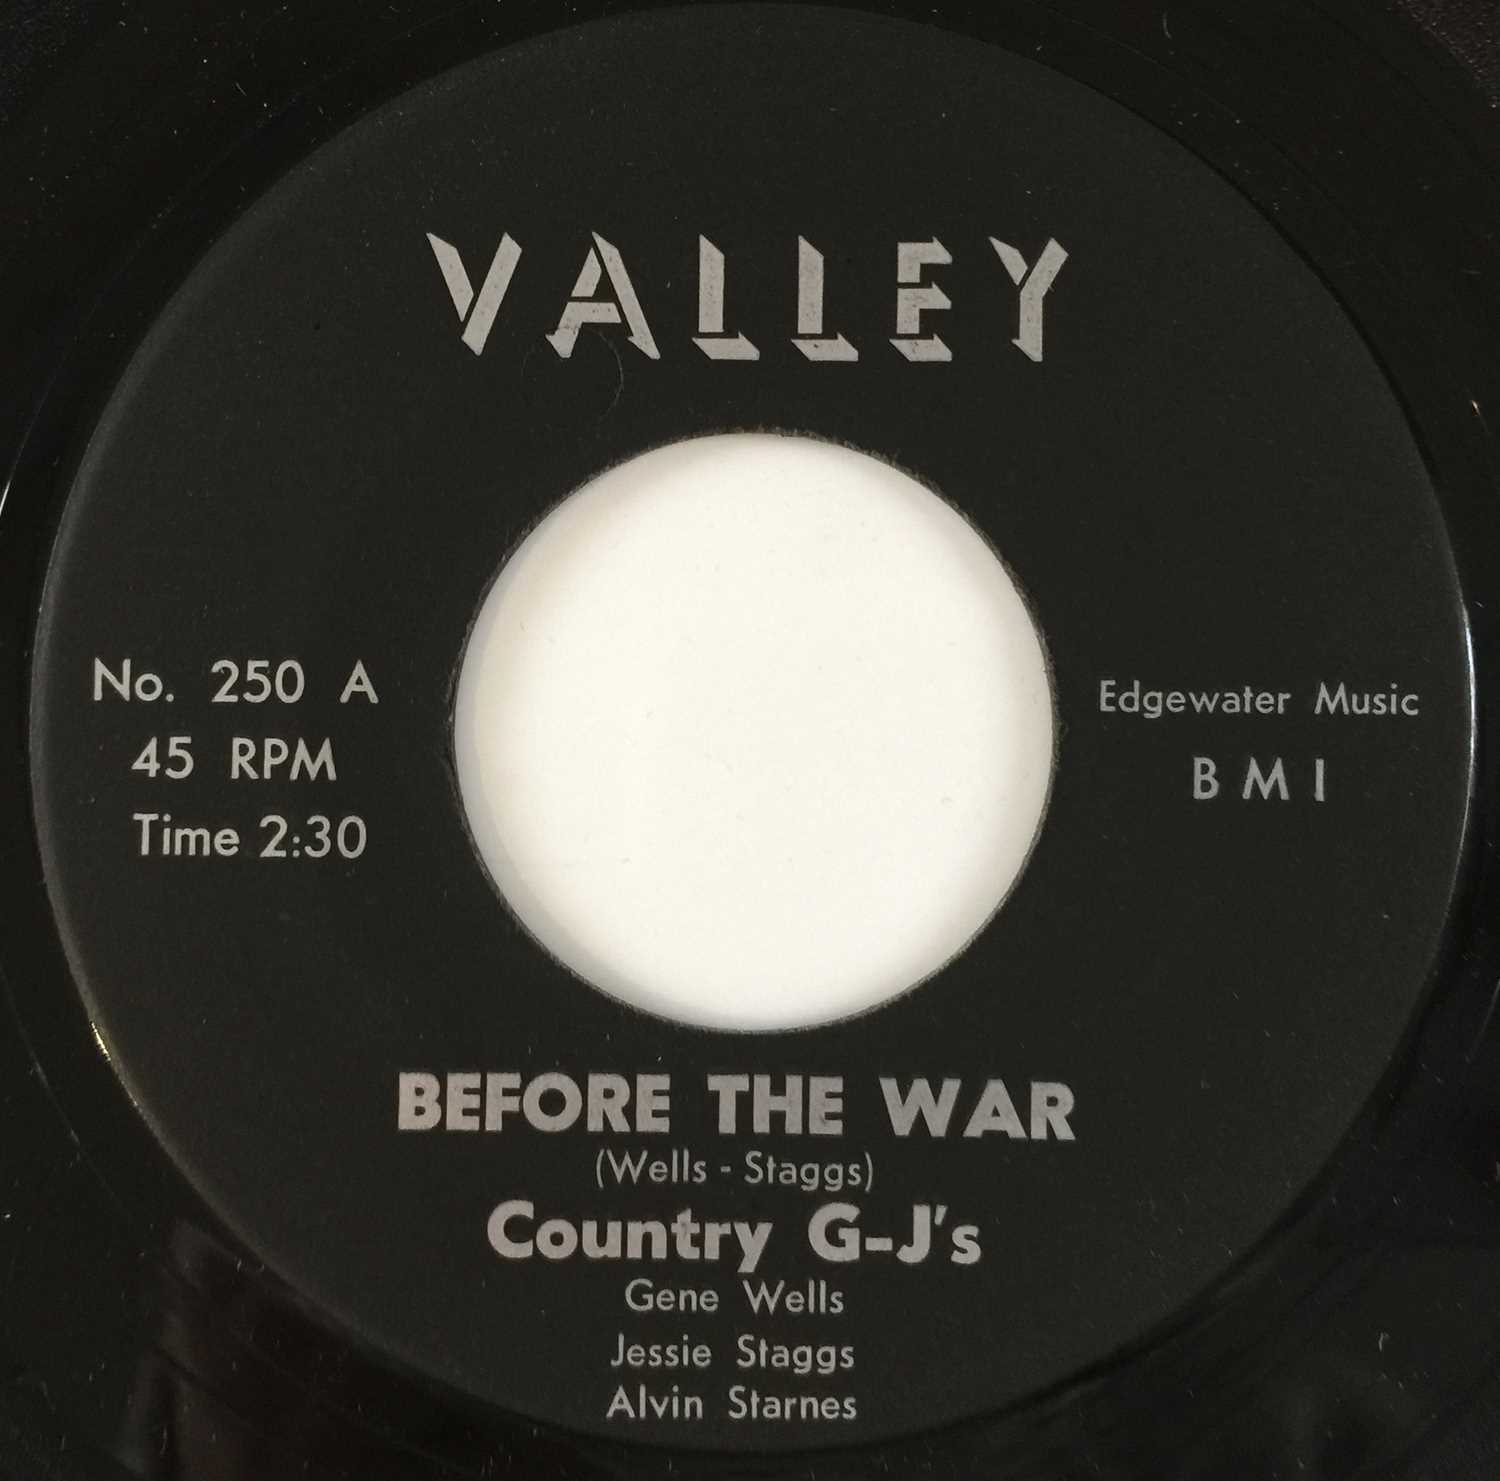 Lot 88 - COUNTRY G-J'S - BEFORE THE WAR / GO GIRL GO 7" (VALLEY No. 250)